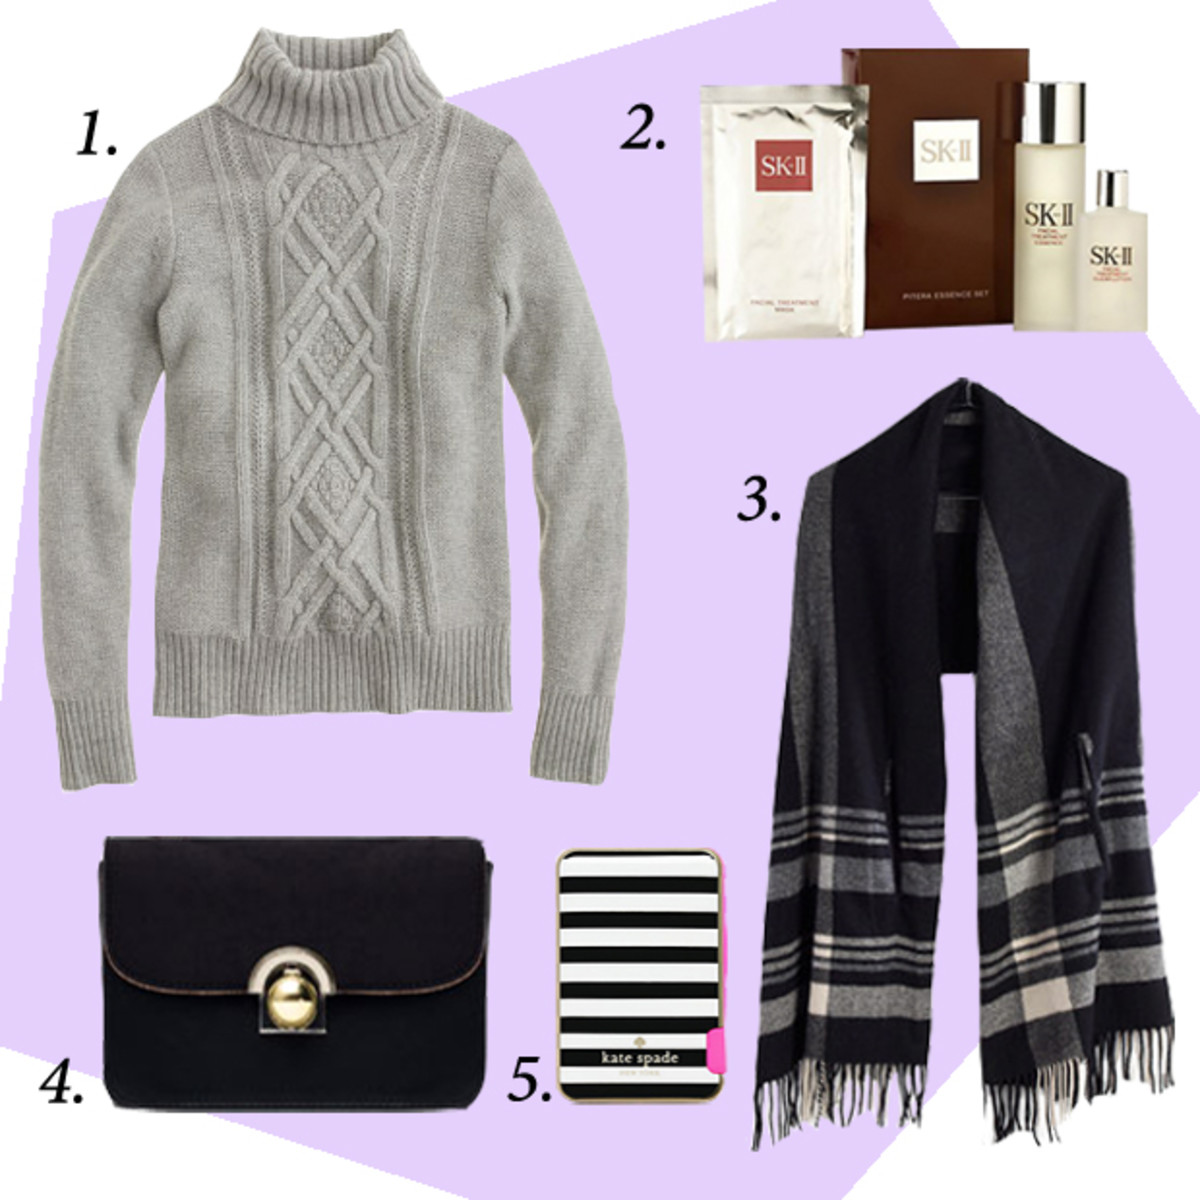 1. J.Crew Cambridge Cable Turtleneck Sweater, $98, available at JCrew.com. 2. SK-II Pitera Essence Set, $99, available at SaksFifthAvenue.com. 3. Madewell Cape Scarf in Huntington Plaid, $79.50, available at Madewell.com. 4. Zara Messenger Bag with Fastening Detail, $49.90, available at Zara.com. 5. Kate Spade New York Micro Stripe Slim Battery Bank, $60, available at KateSpade.com.